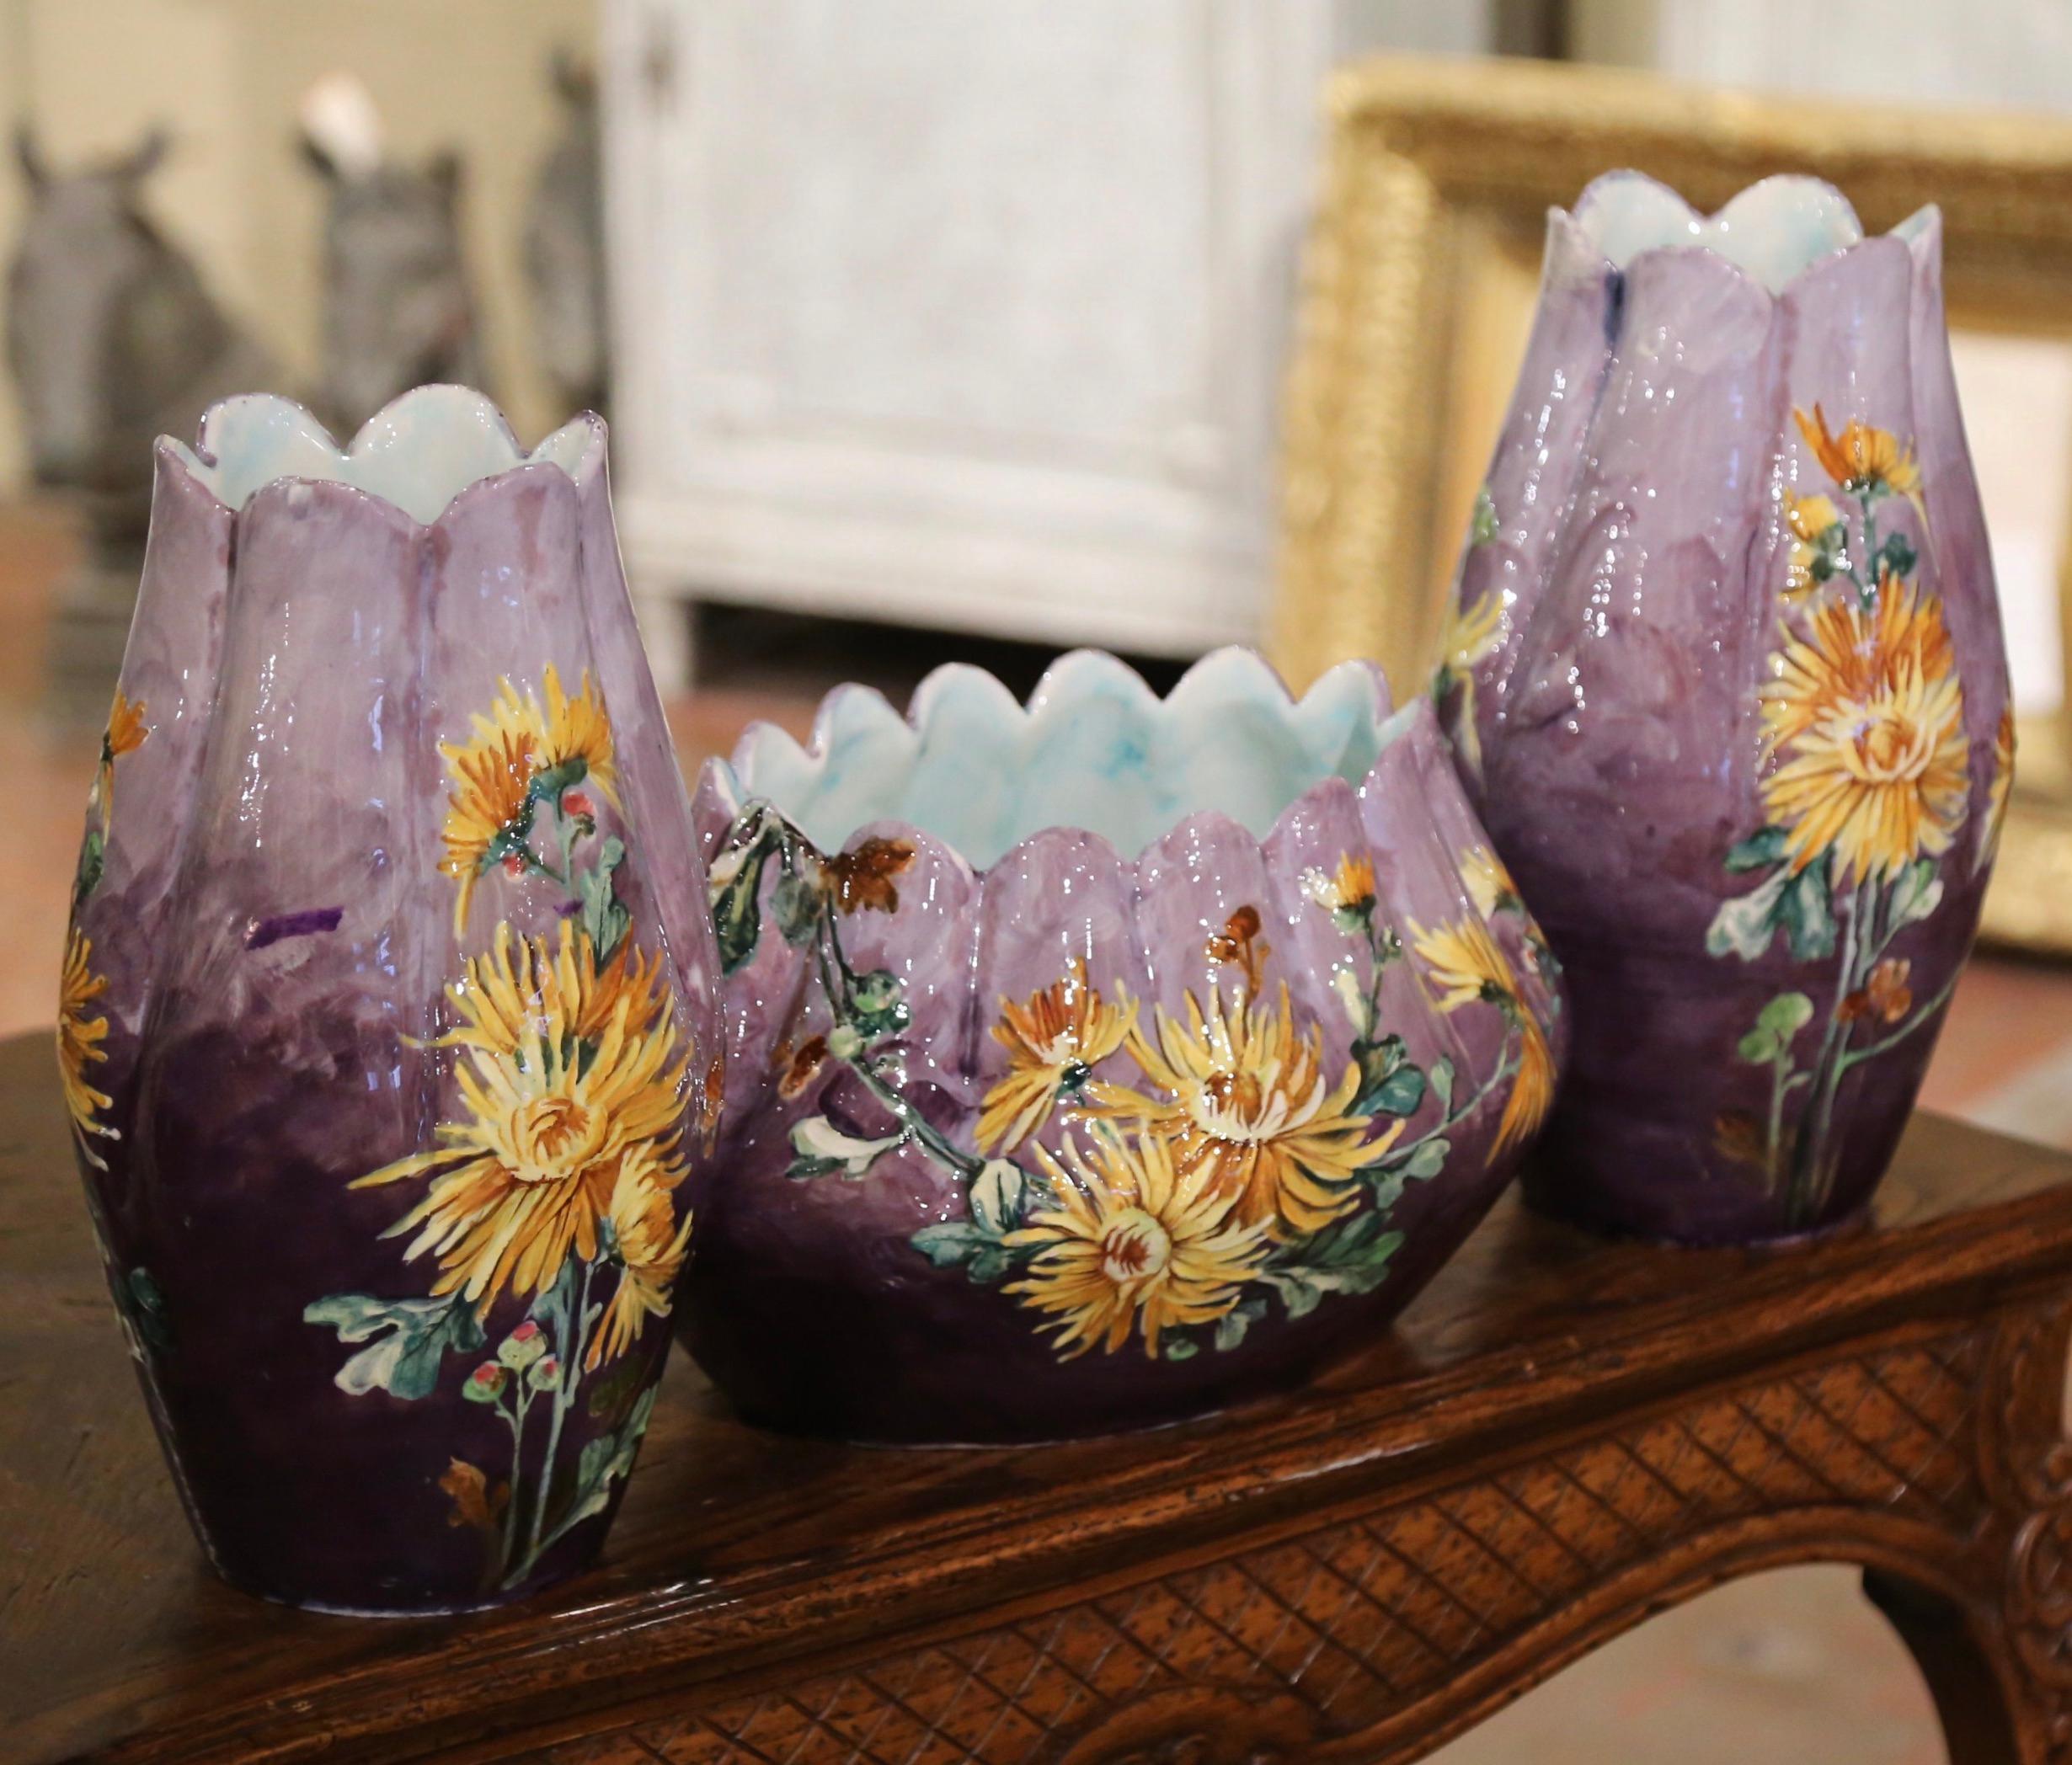 19th Century French Hand-Painted Barbotine Vases Signed P. Perret, Set of Three For Sale 2